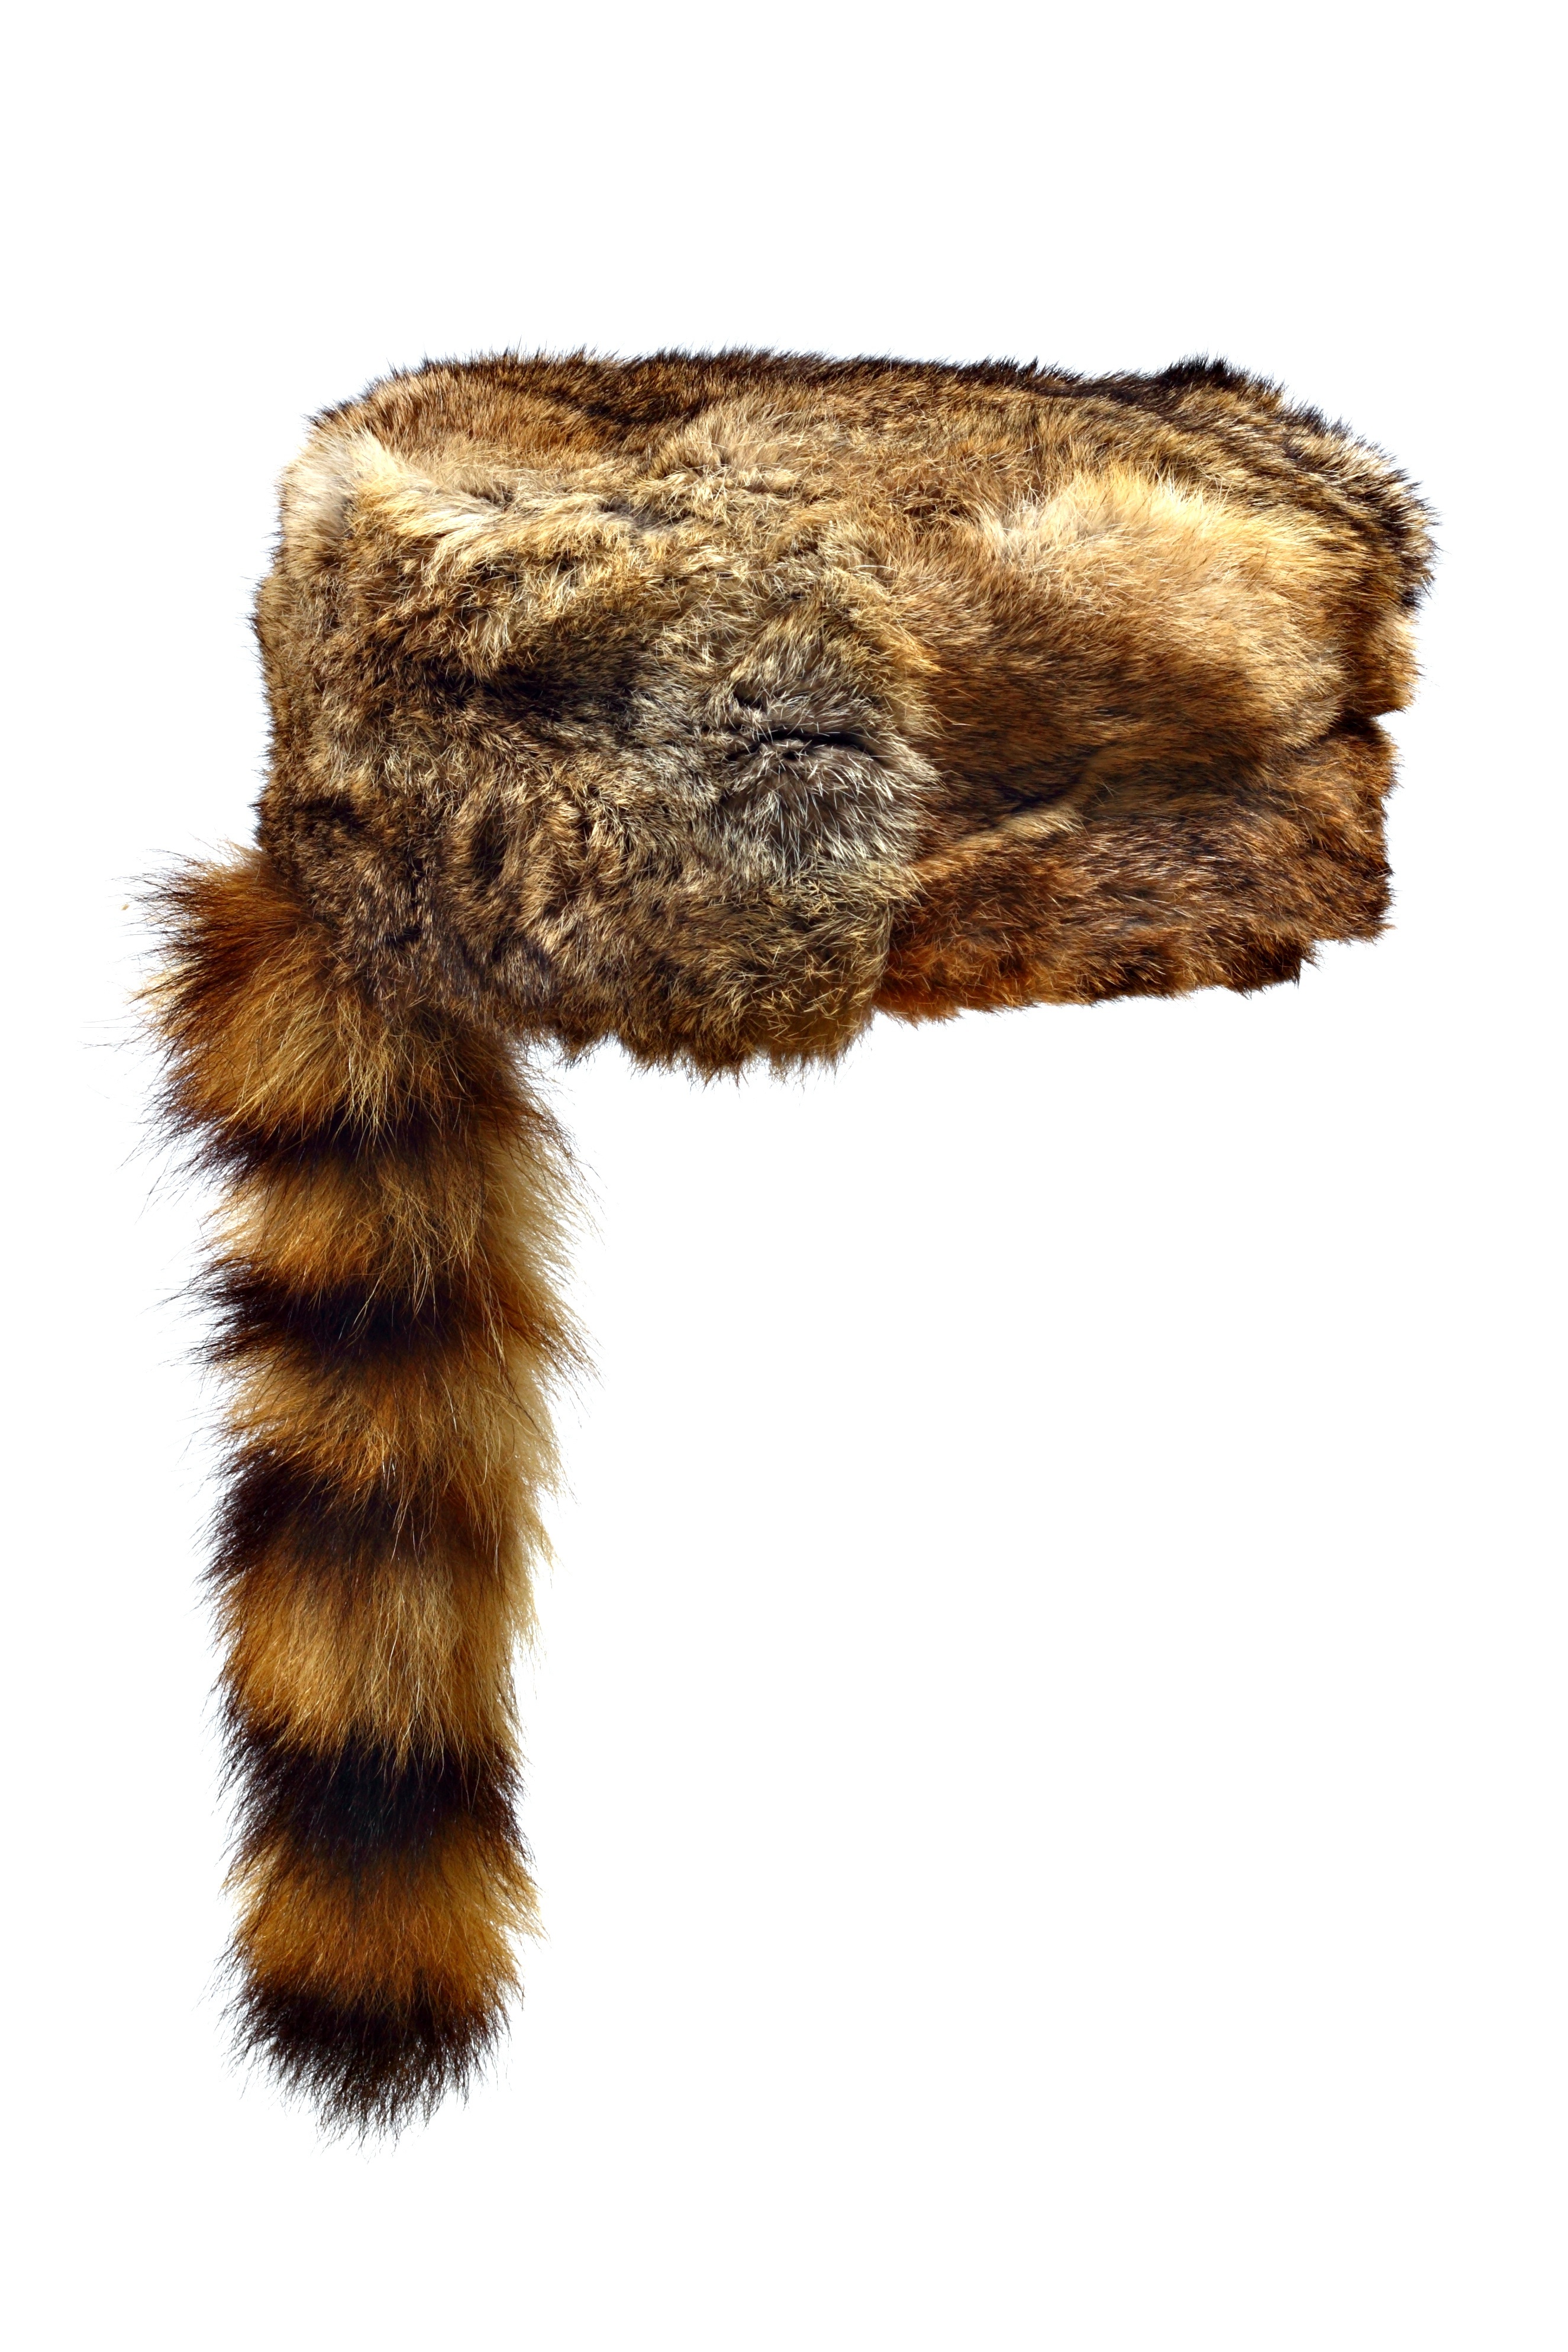 17335383 – fur crockett hat with a racoon tail isolated on white background